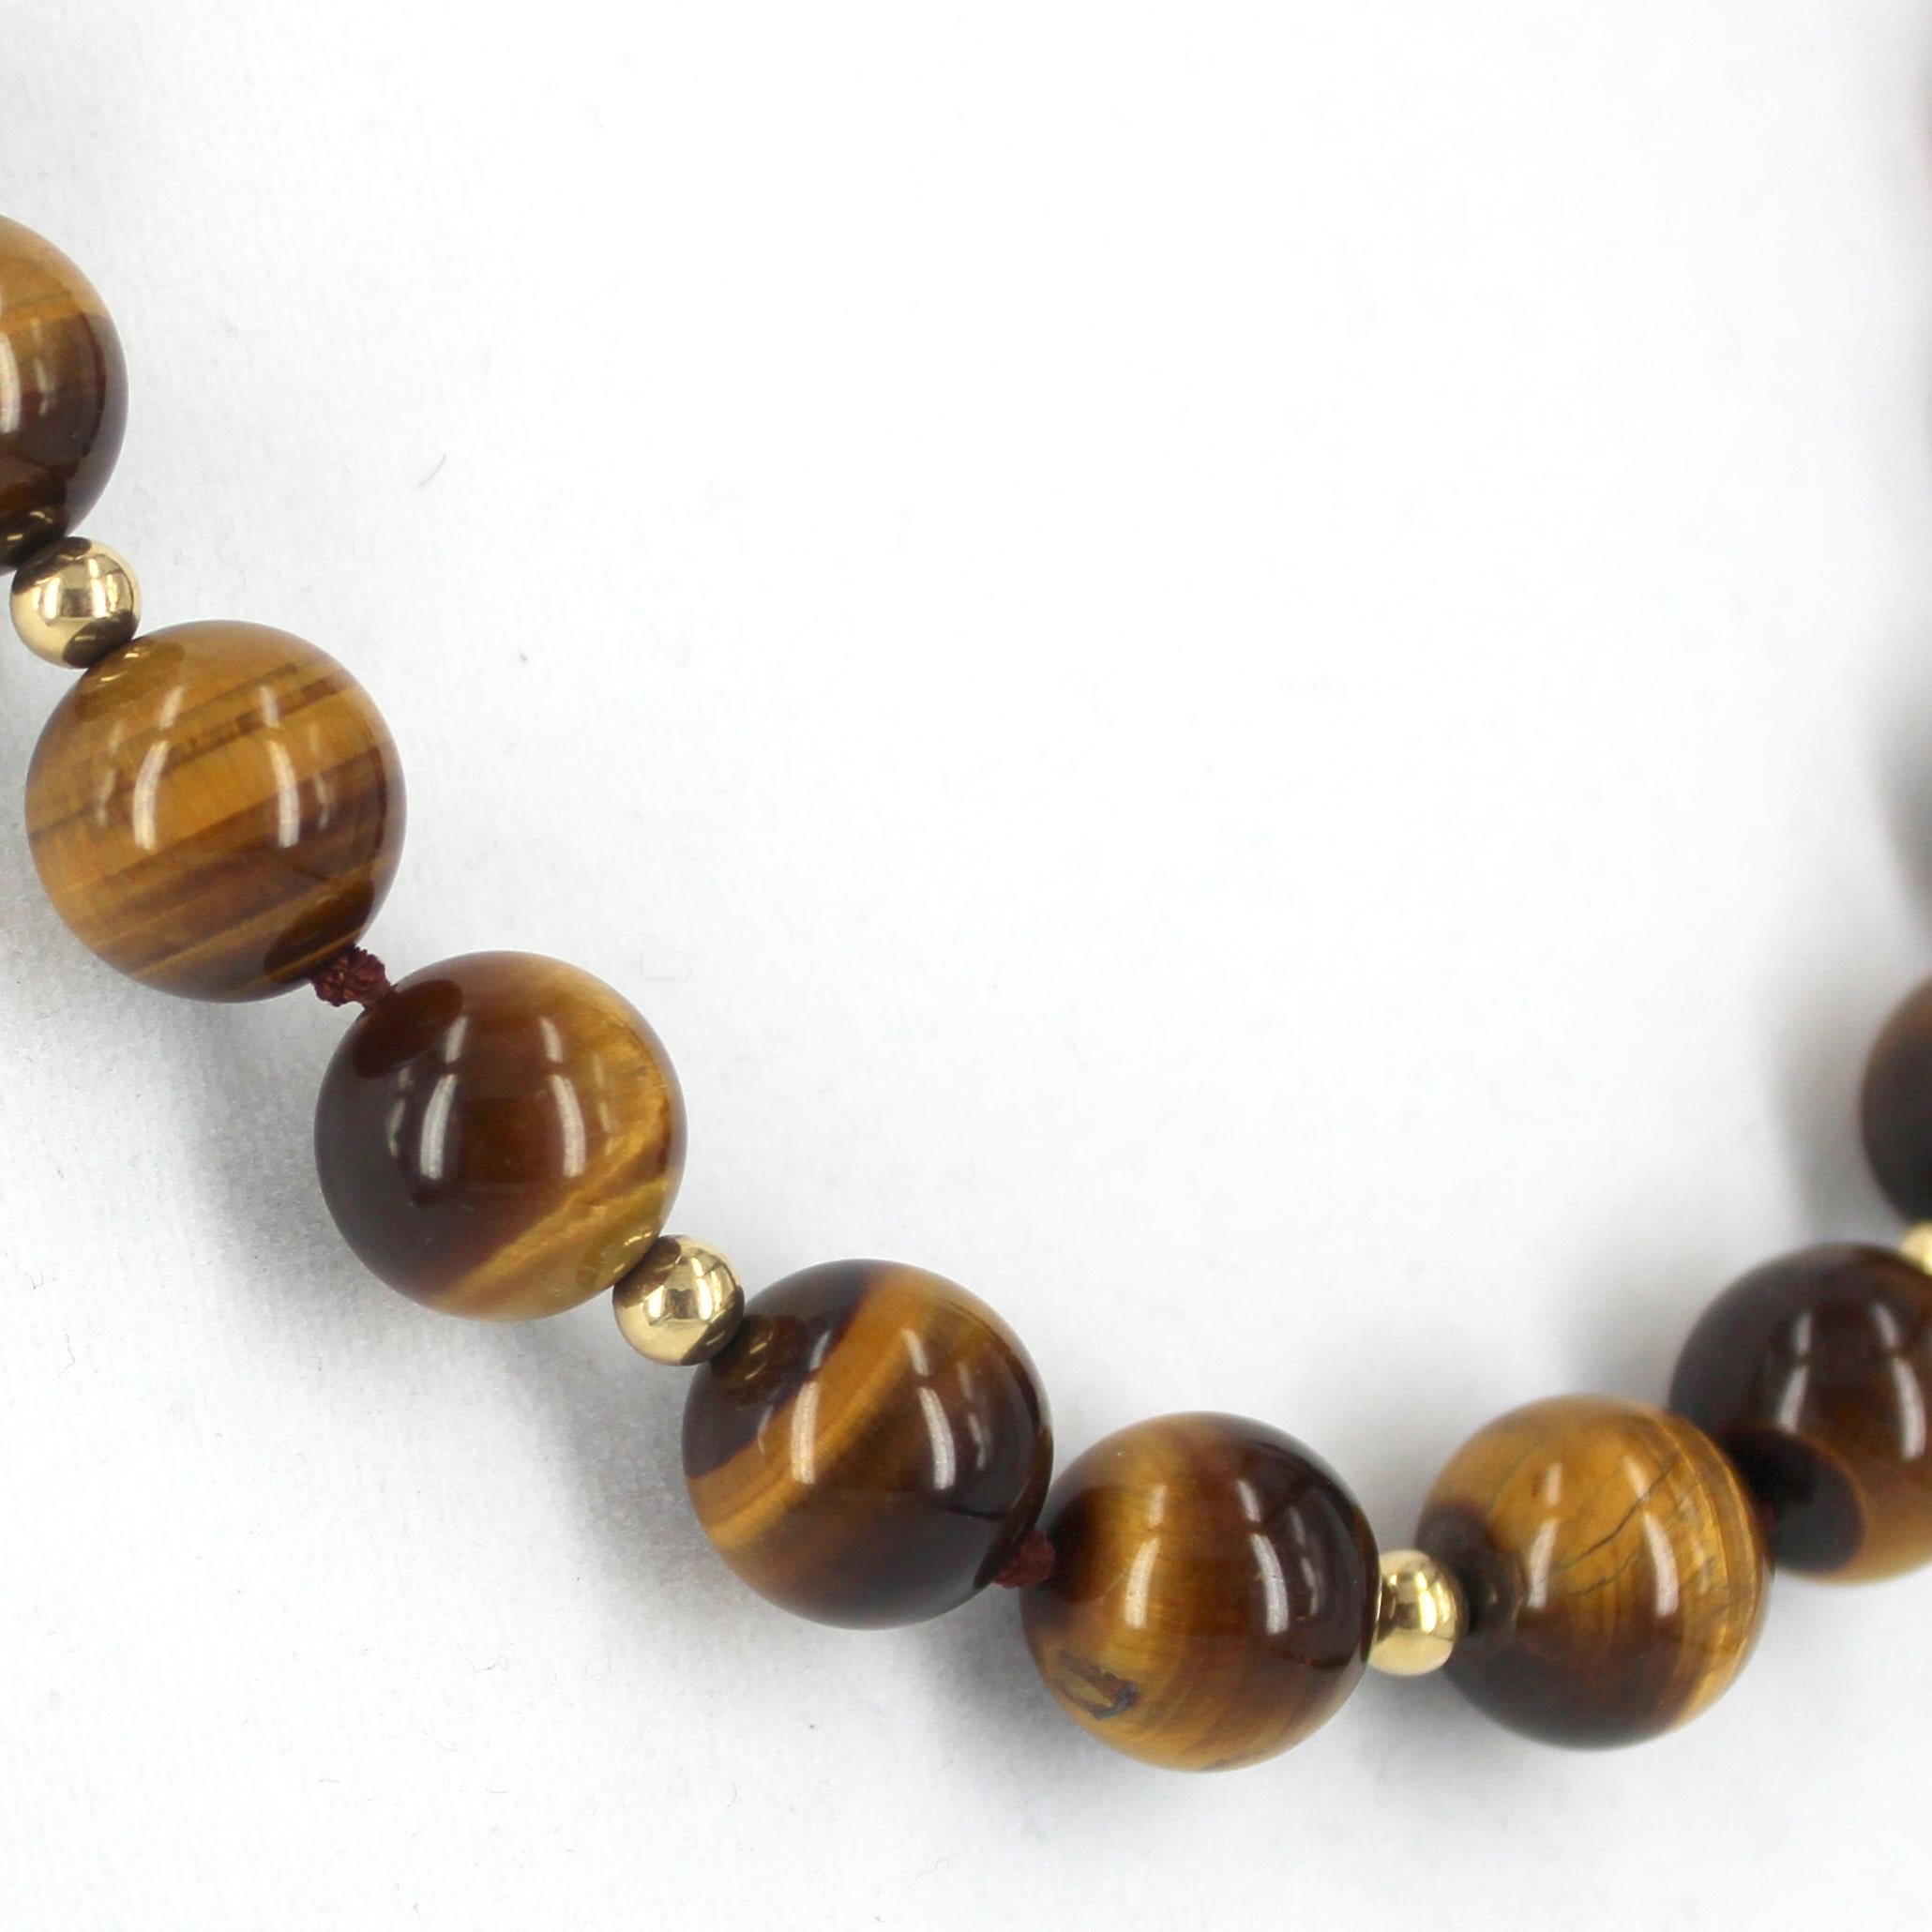 Tigers Eye 14mm Polished Round Bead Necklace 52cm Knotted in Sections

Descriptions Tigers Eye Round Beads 14mm 
                      Gold Filled Round Beads 5mm 
                      